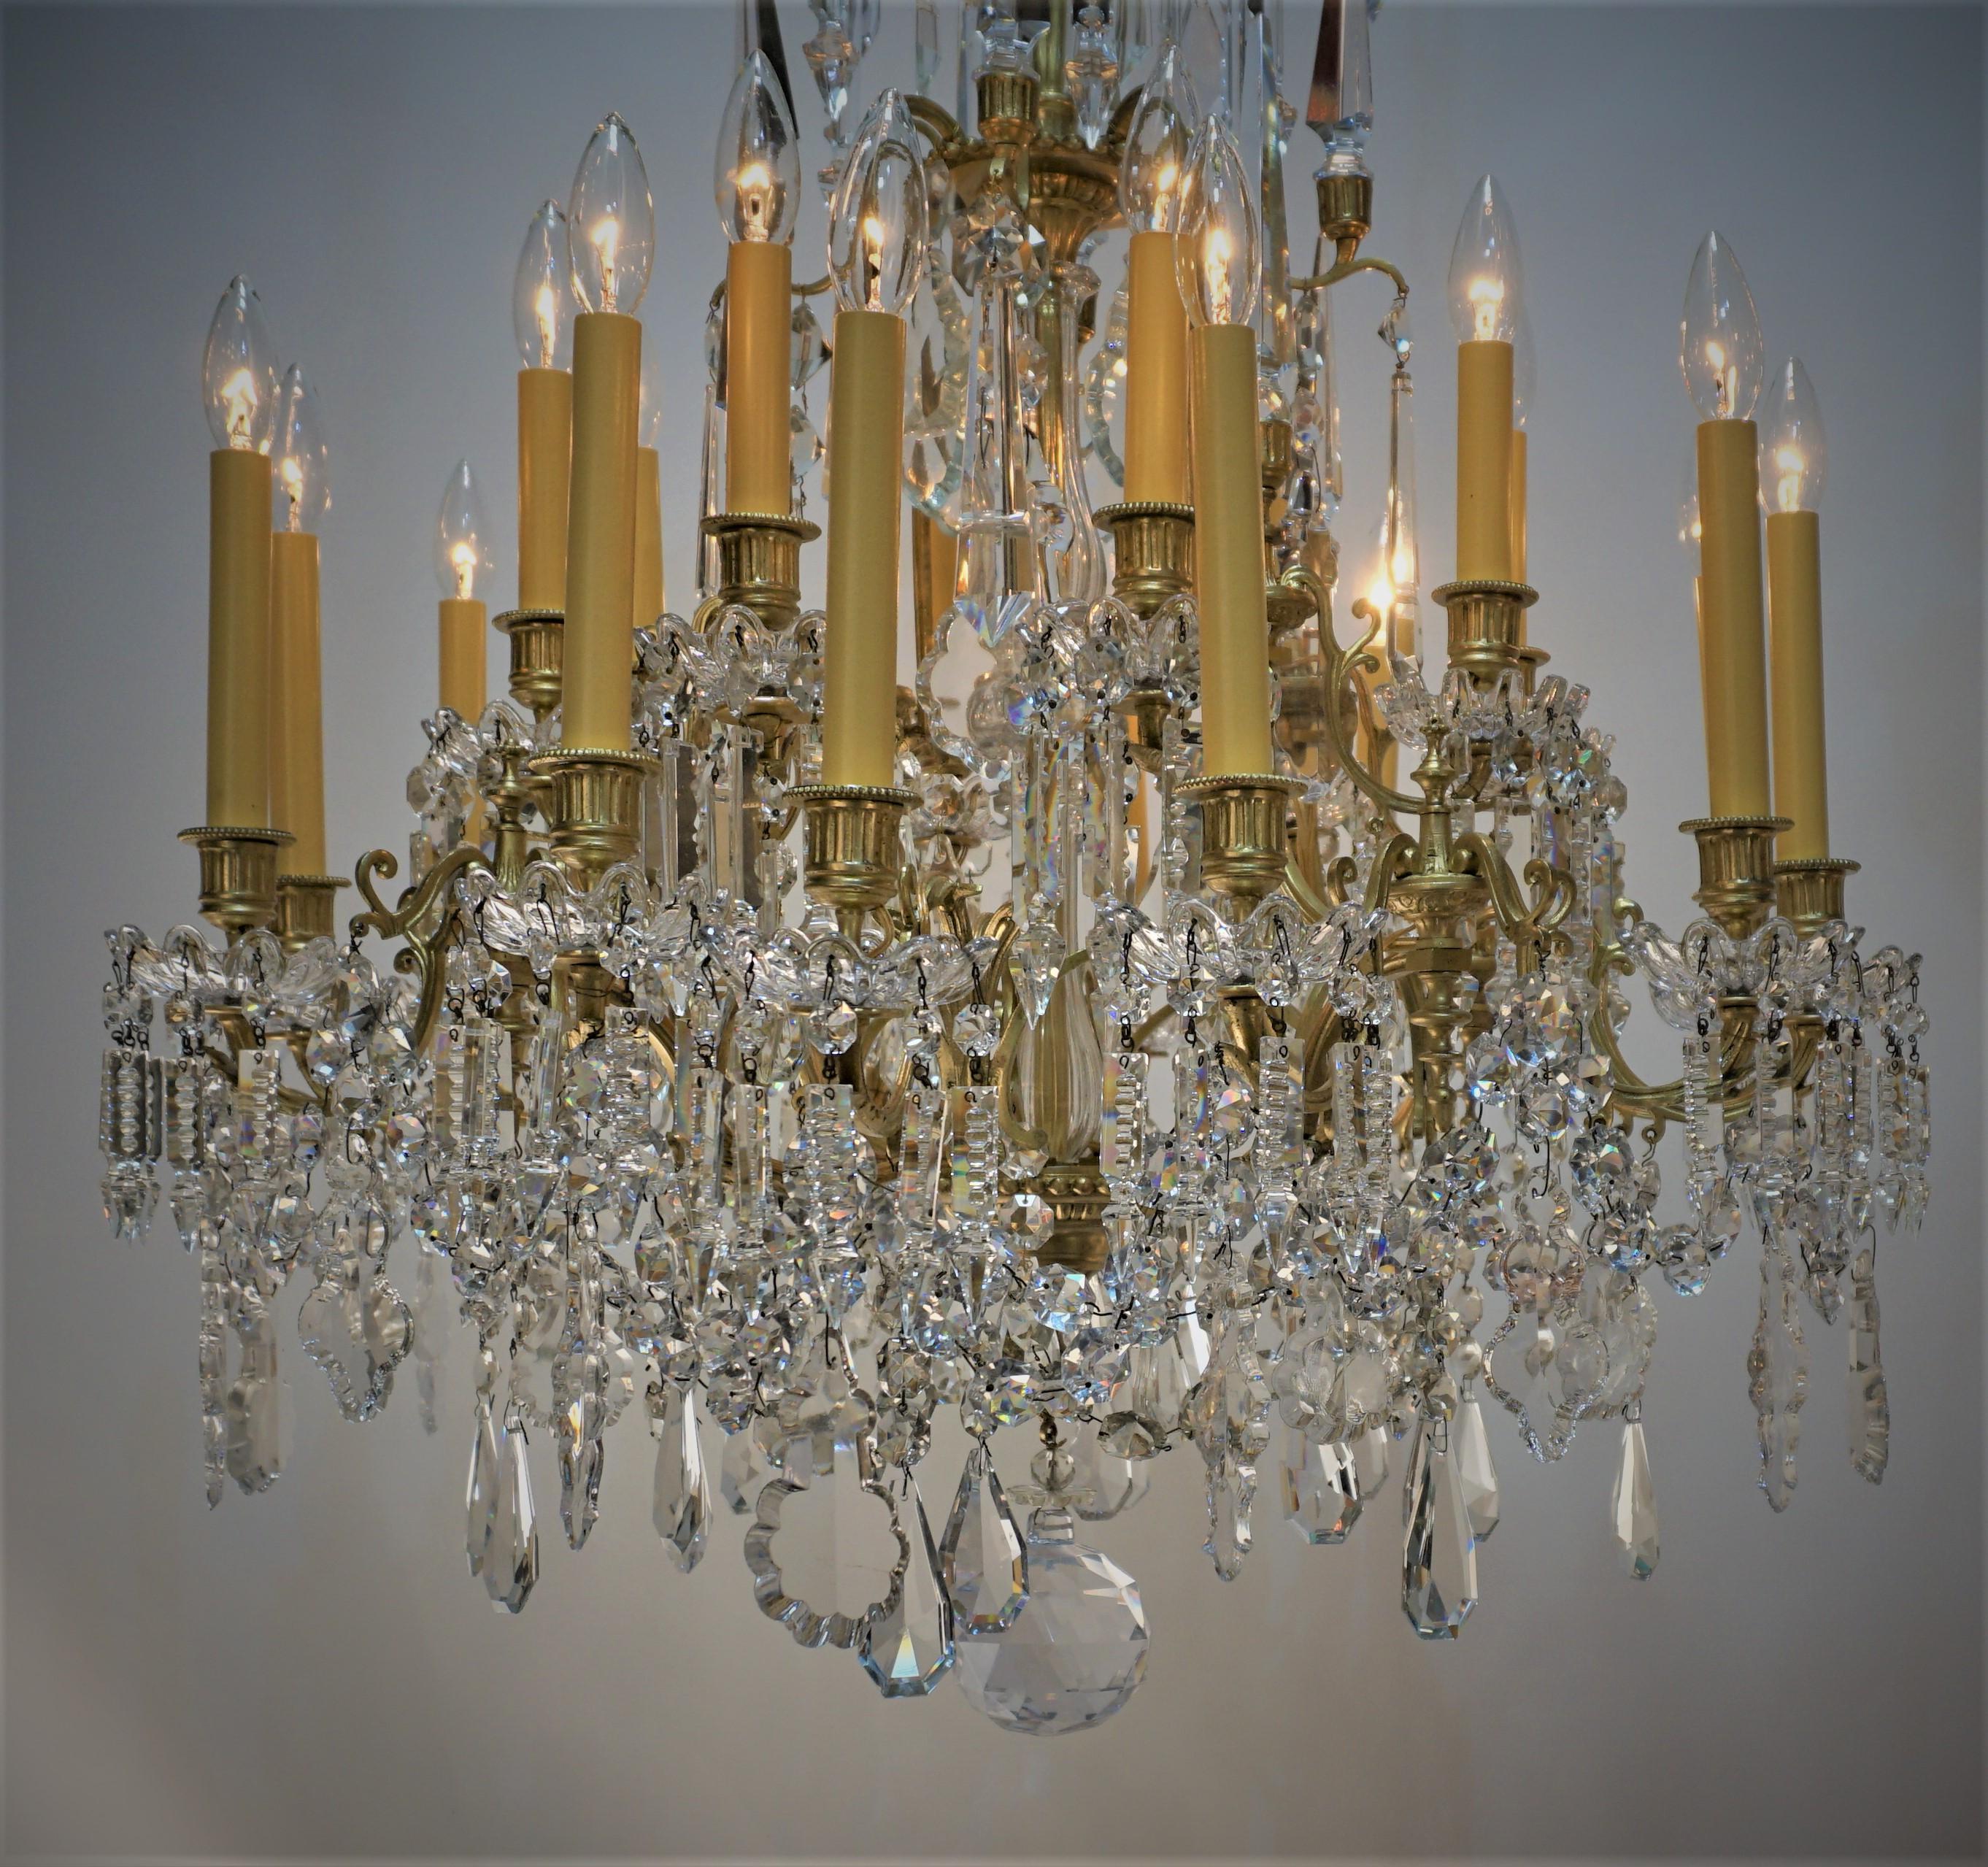 Elegant 19th century electrified 20 lights crystal and bronze chandelier.
Measurement: 31